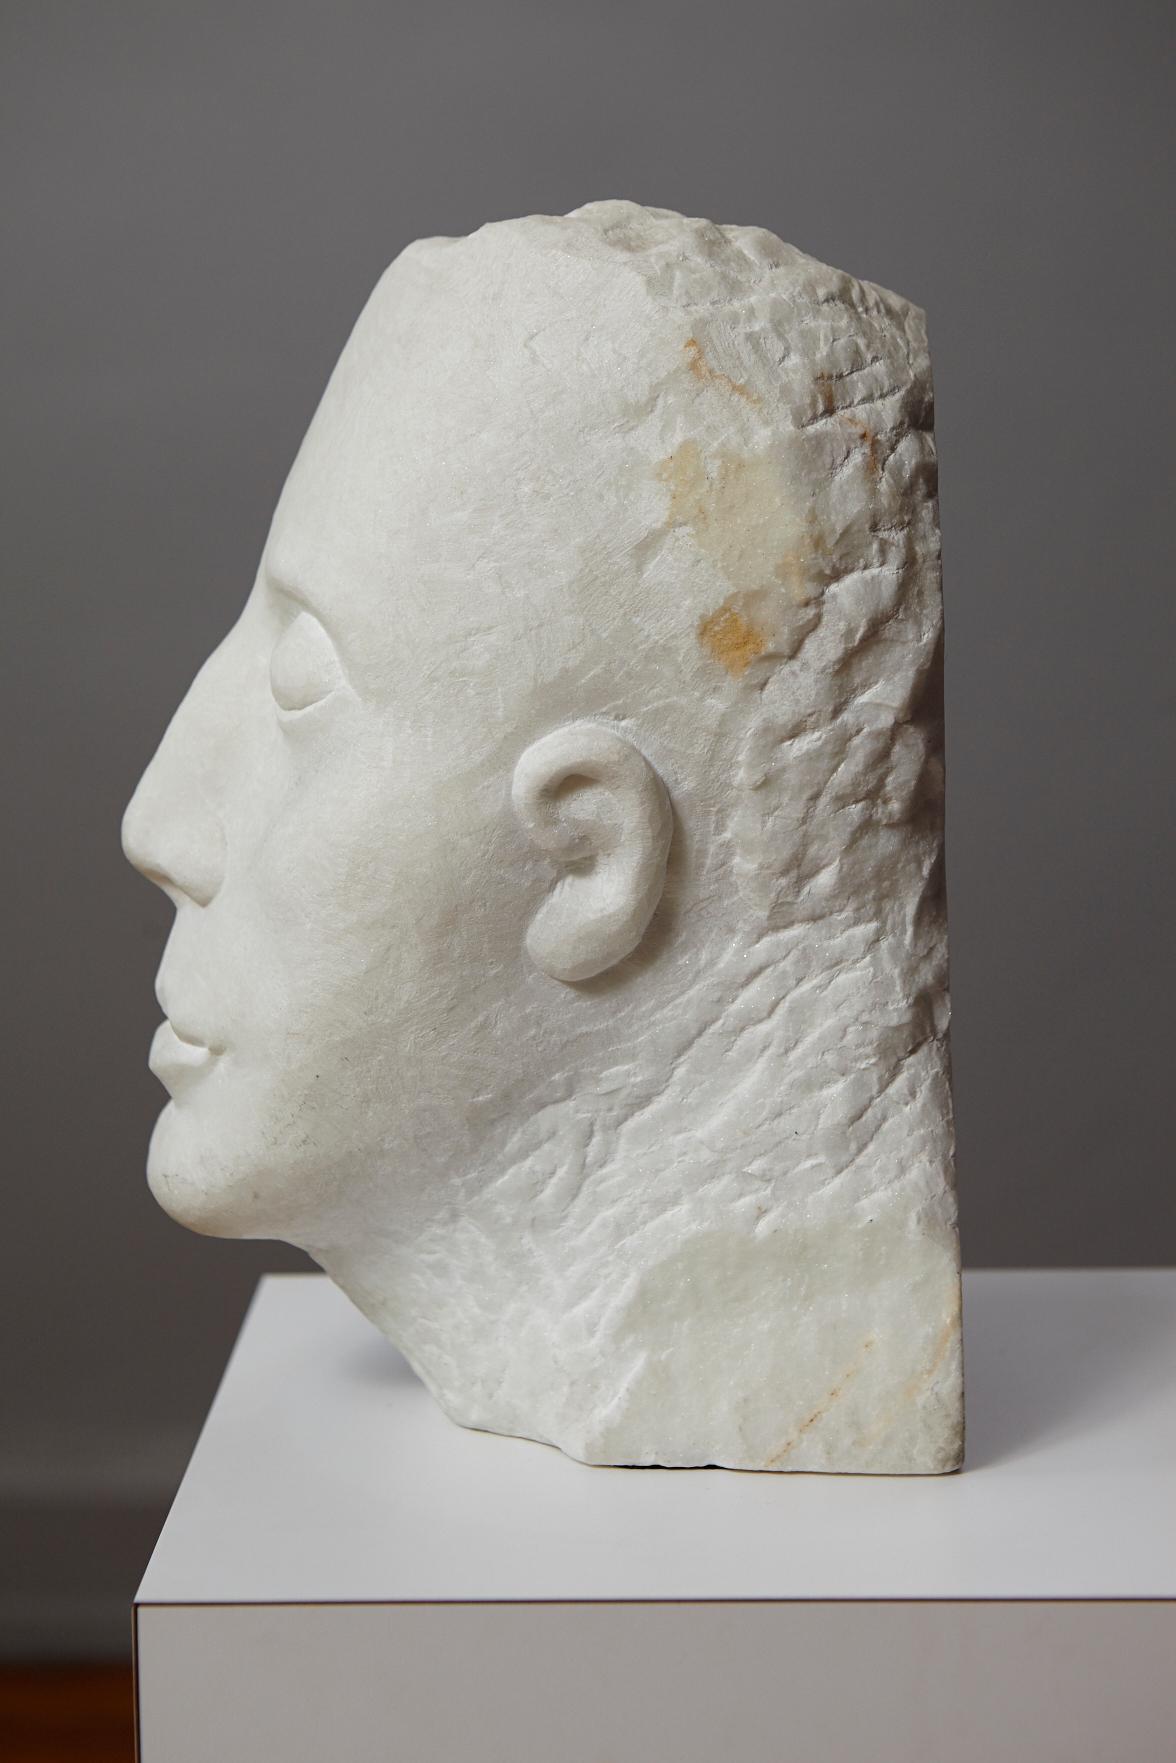 Dolores Singer, American (1936)
Head III
White Carrara marble relief sculpture, unpolished finish

A modern 20th century interpretation as an homage to the classic Greek sculptures.

Dolores Singer has used White Carrara marble in an unpolished